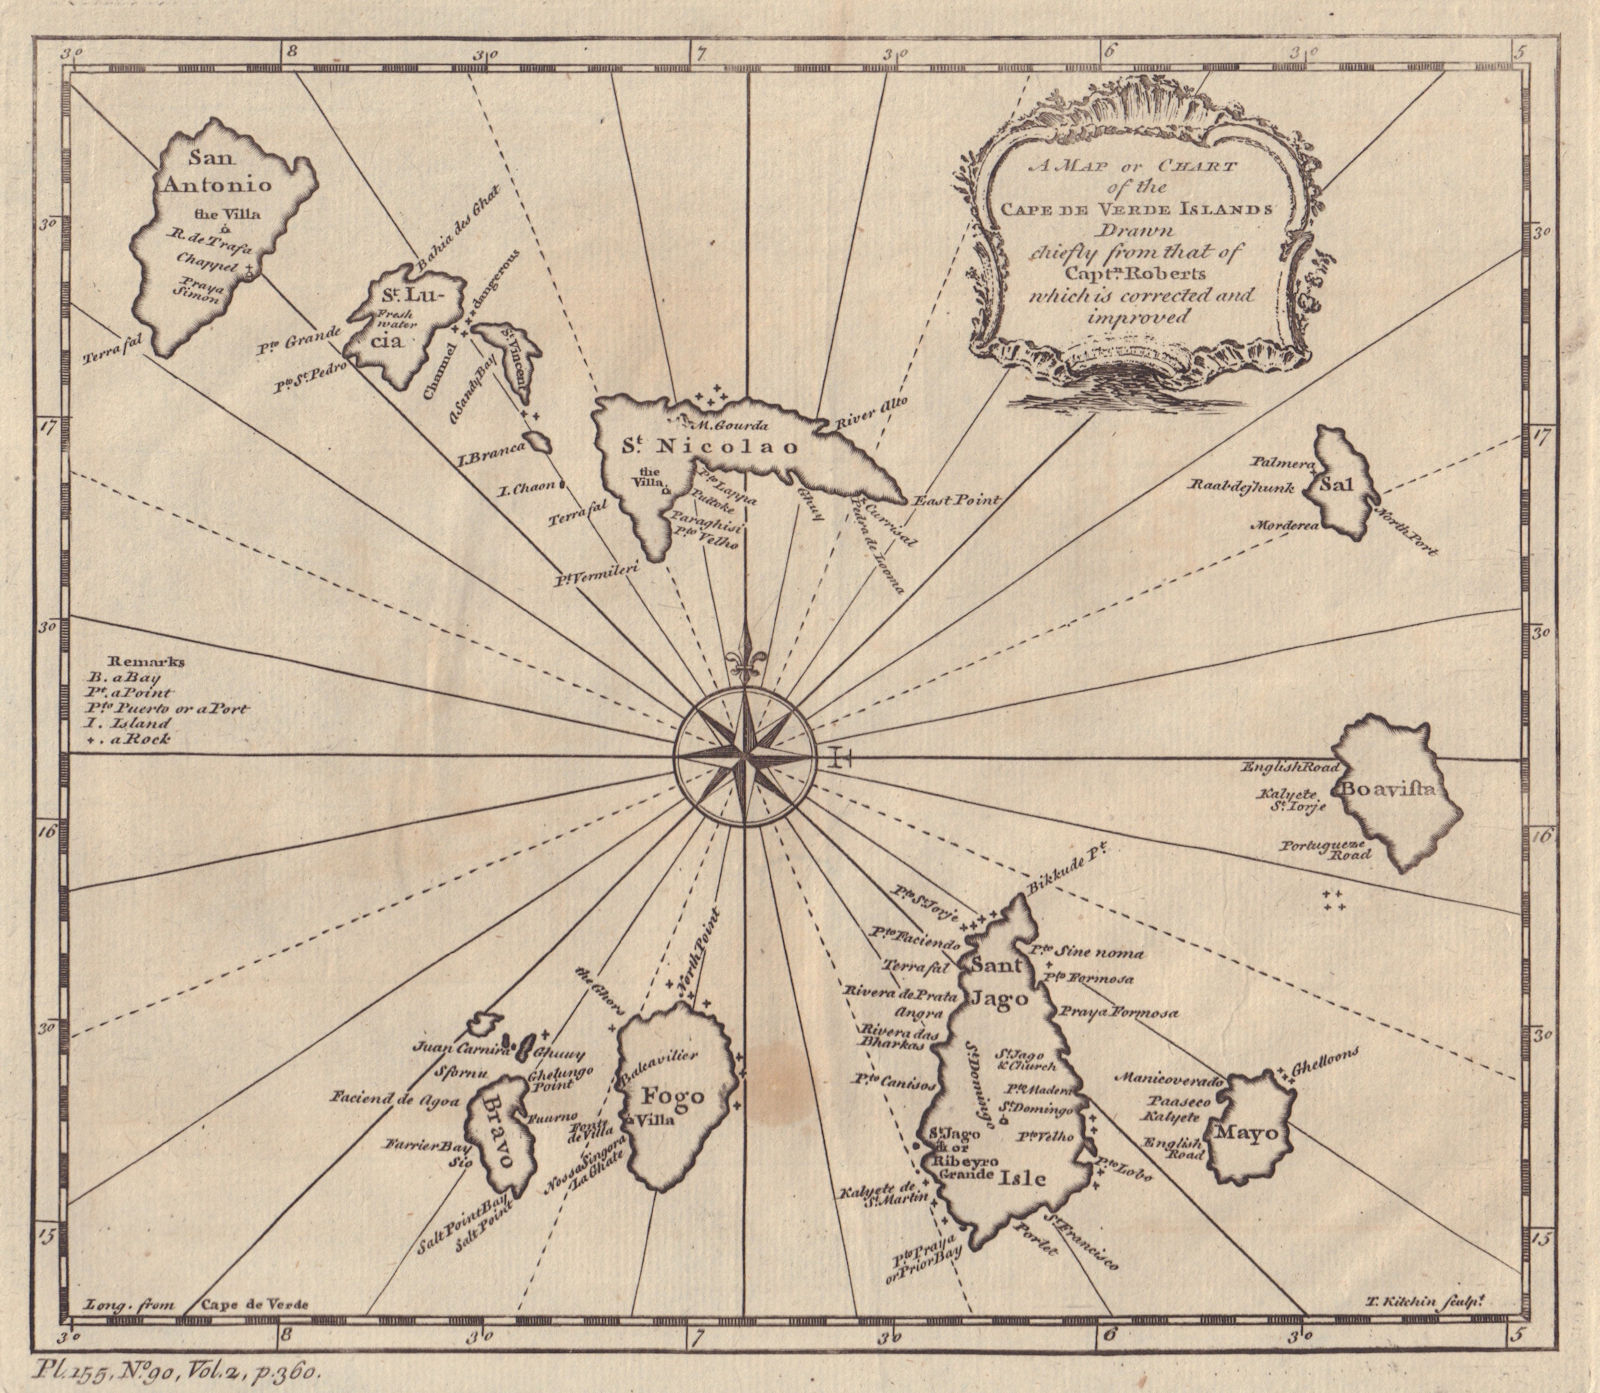 Associate Product A map or chart of the Cape de Verde Islands by Thomas Kitchin 1752 old